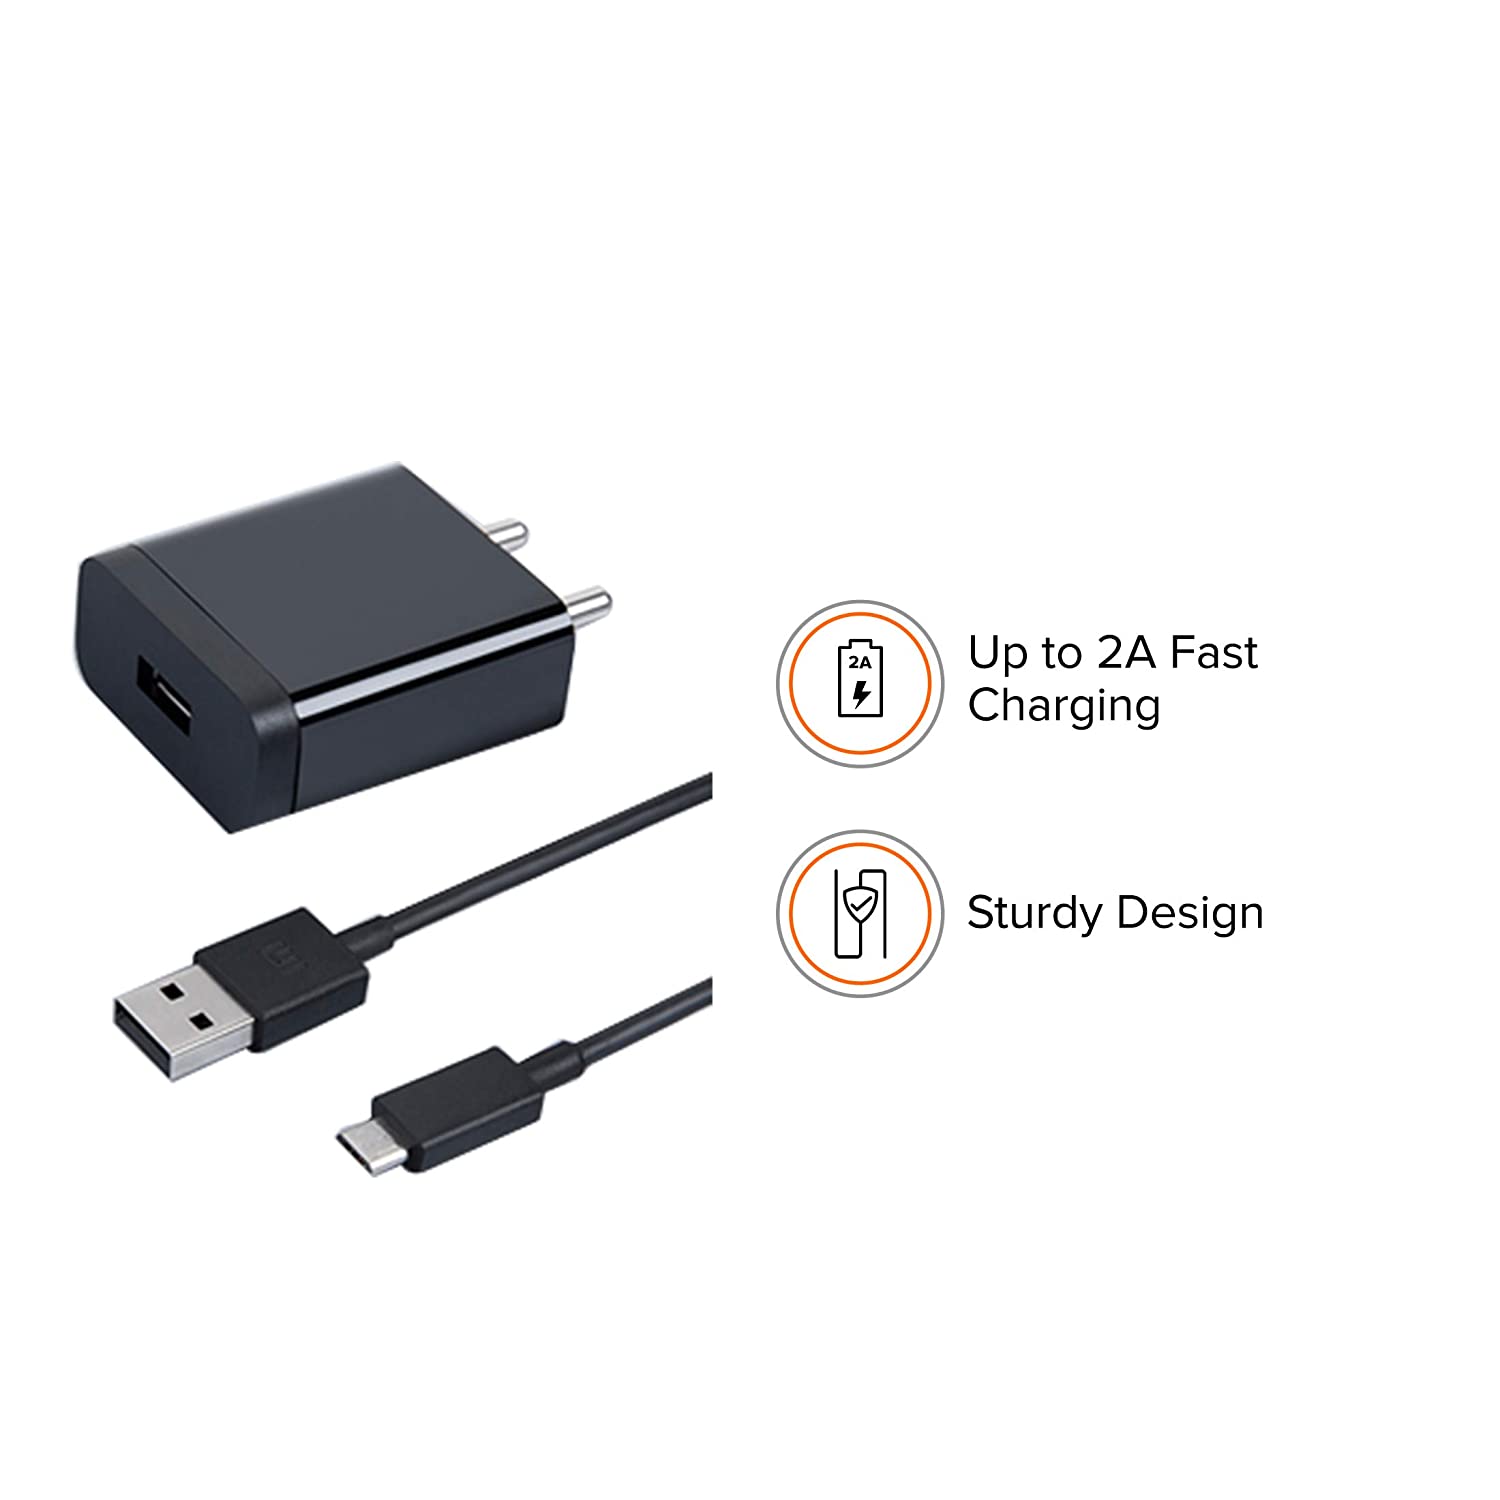 Mi 2A 10W Charger with Cable (1.2 Meter, Black) MRP 599/-